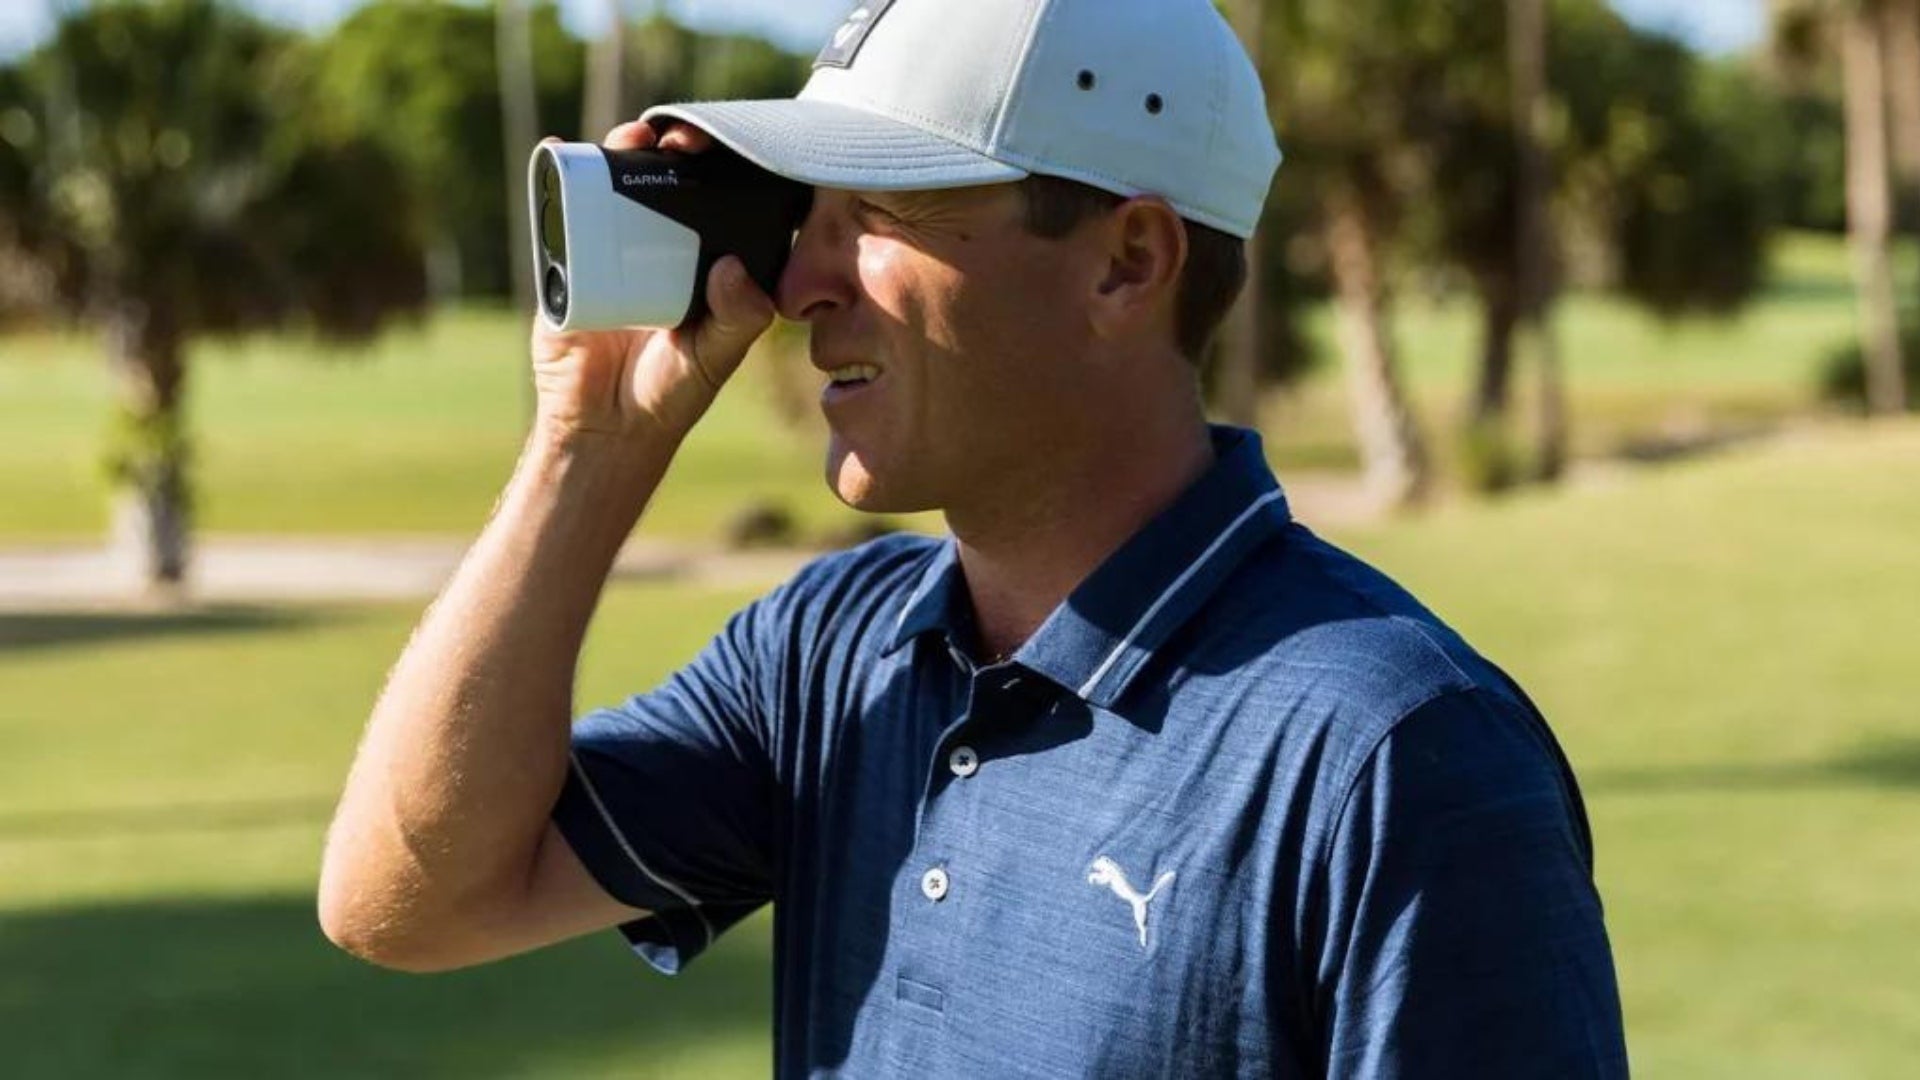 Measure the distance, master the course with our advanced range finder technology.